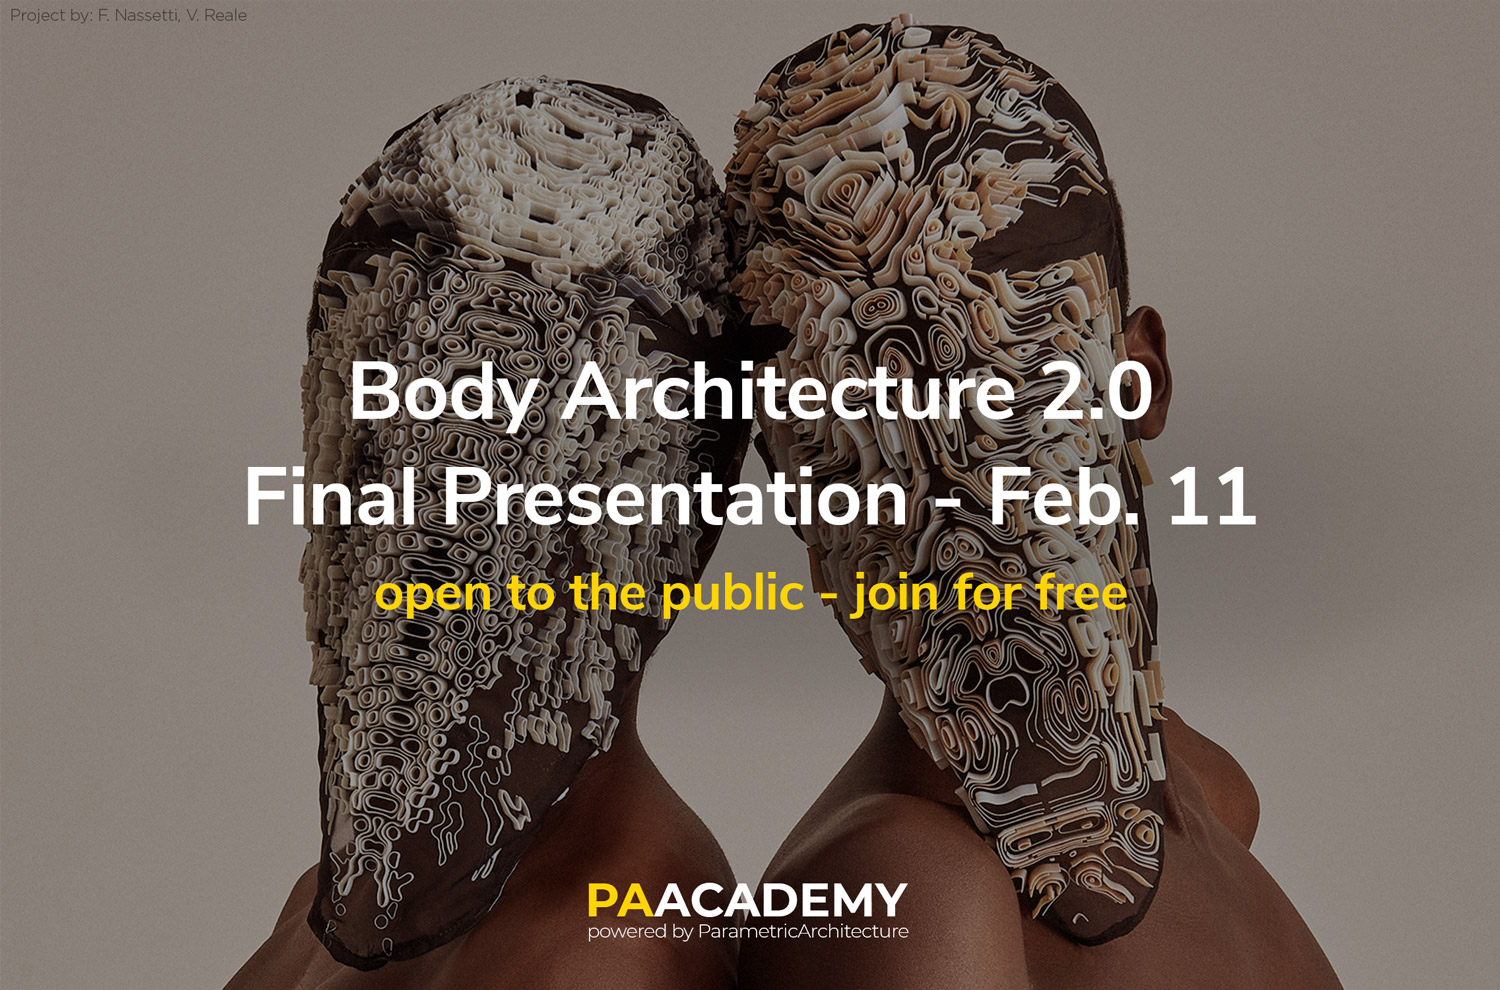 Final presentation of the Body Architecture 2.0